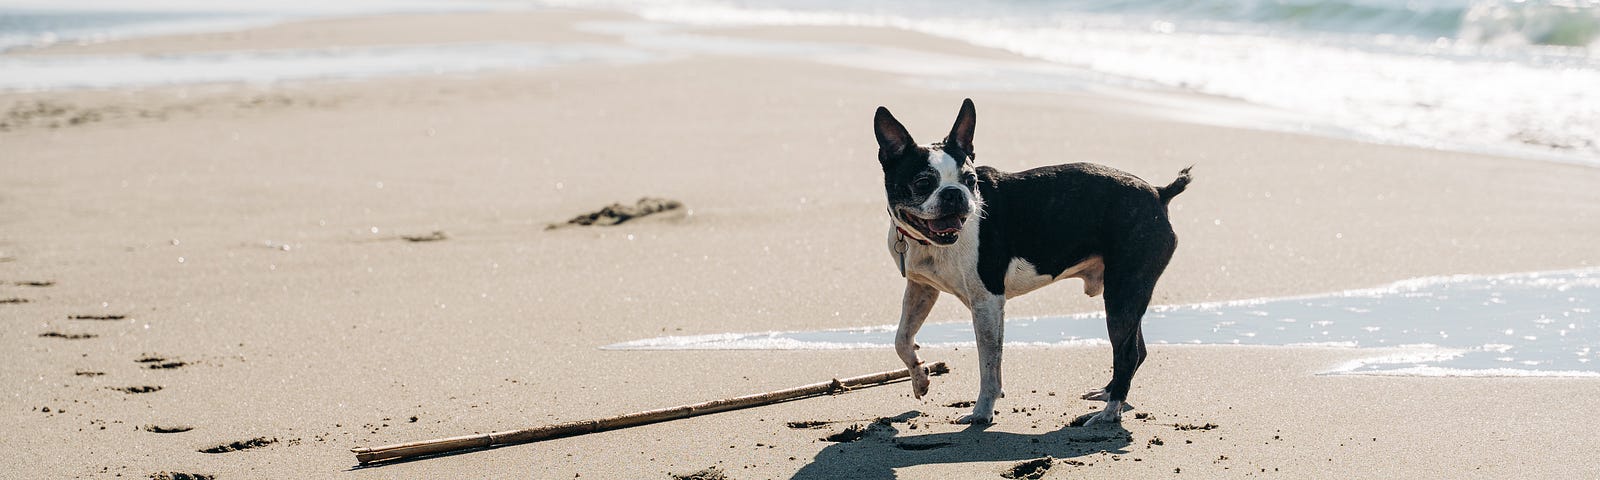 Boston terrier, panting, is on a beach with a view of the water in the background.